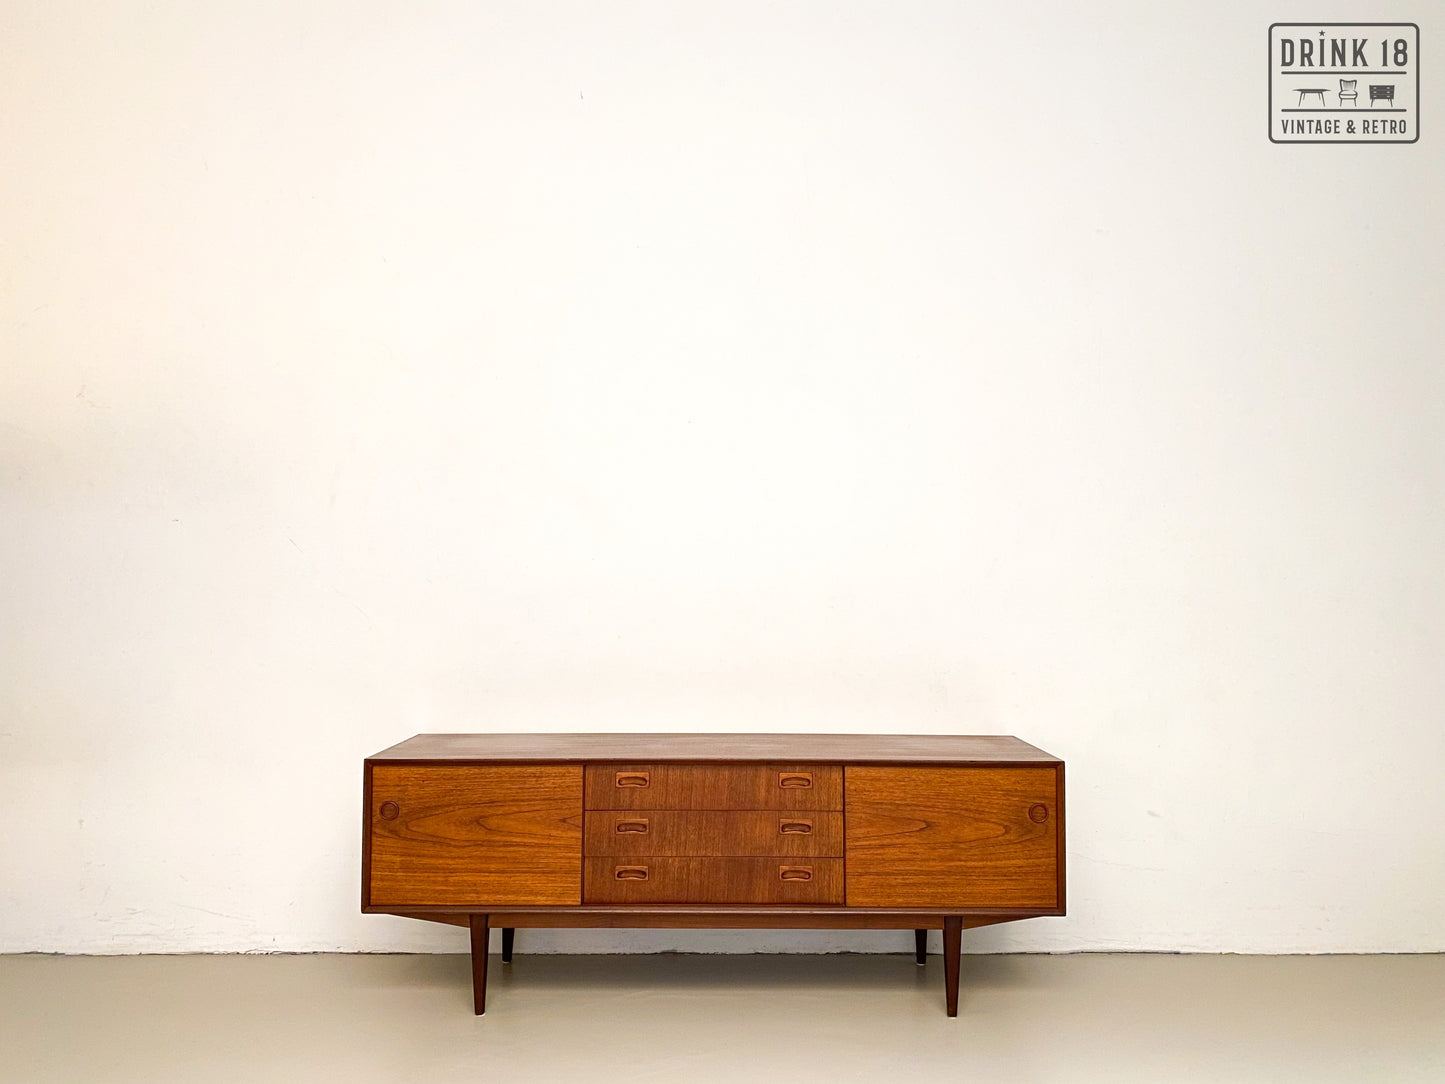 Sideboard - Firma Jacobs Klooster